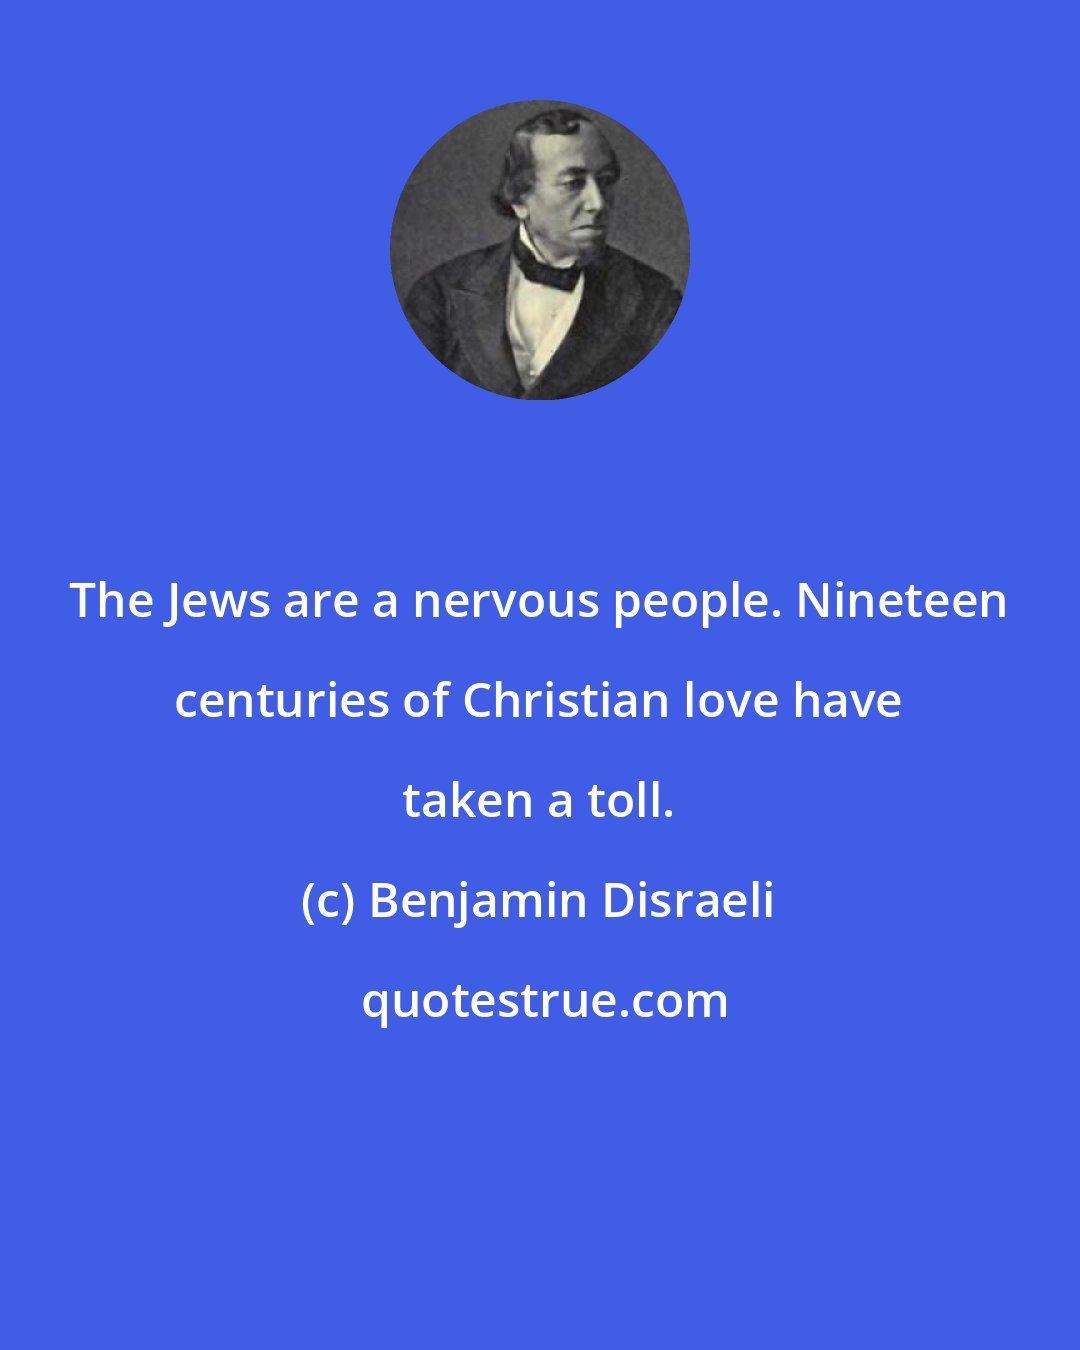 Benjamin Disraeli: The Jews are a nervous people. Nineteen centuries of Christian love have taken a toll.